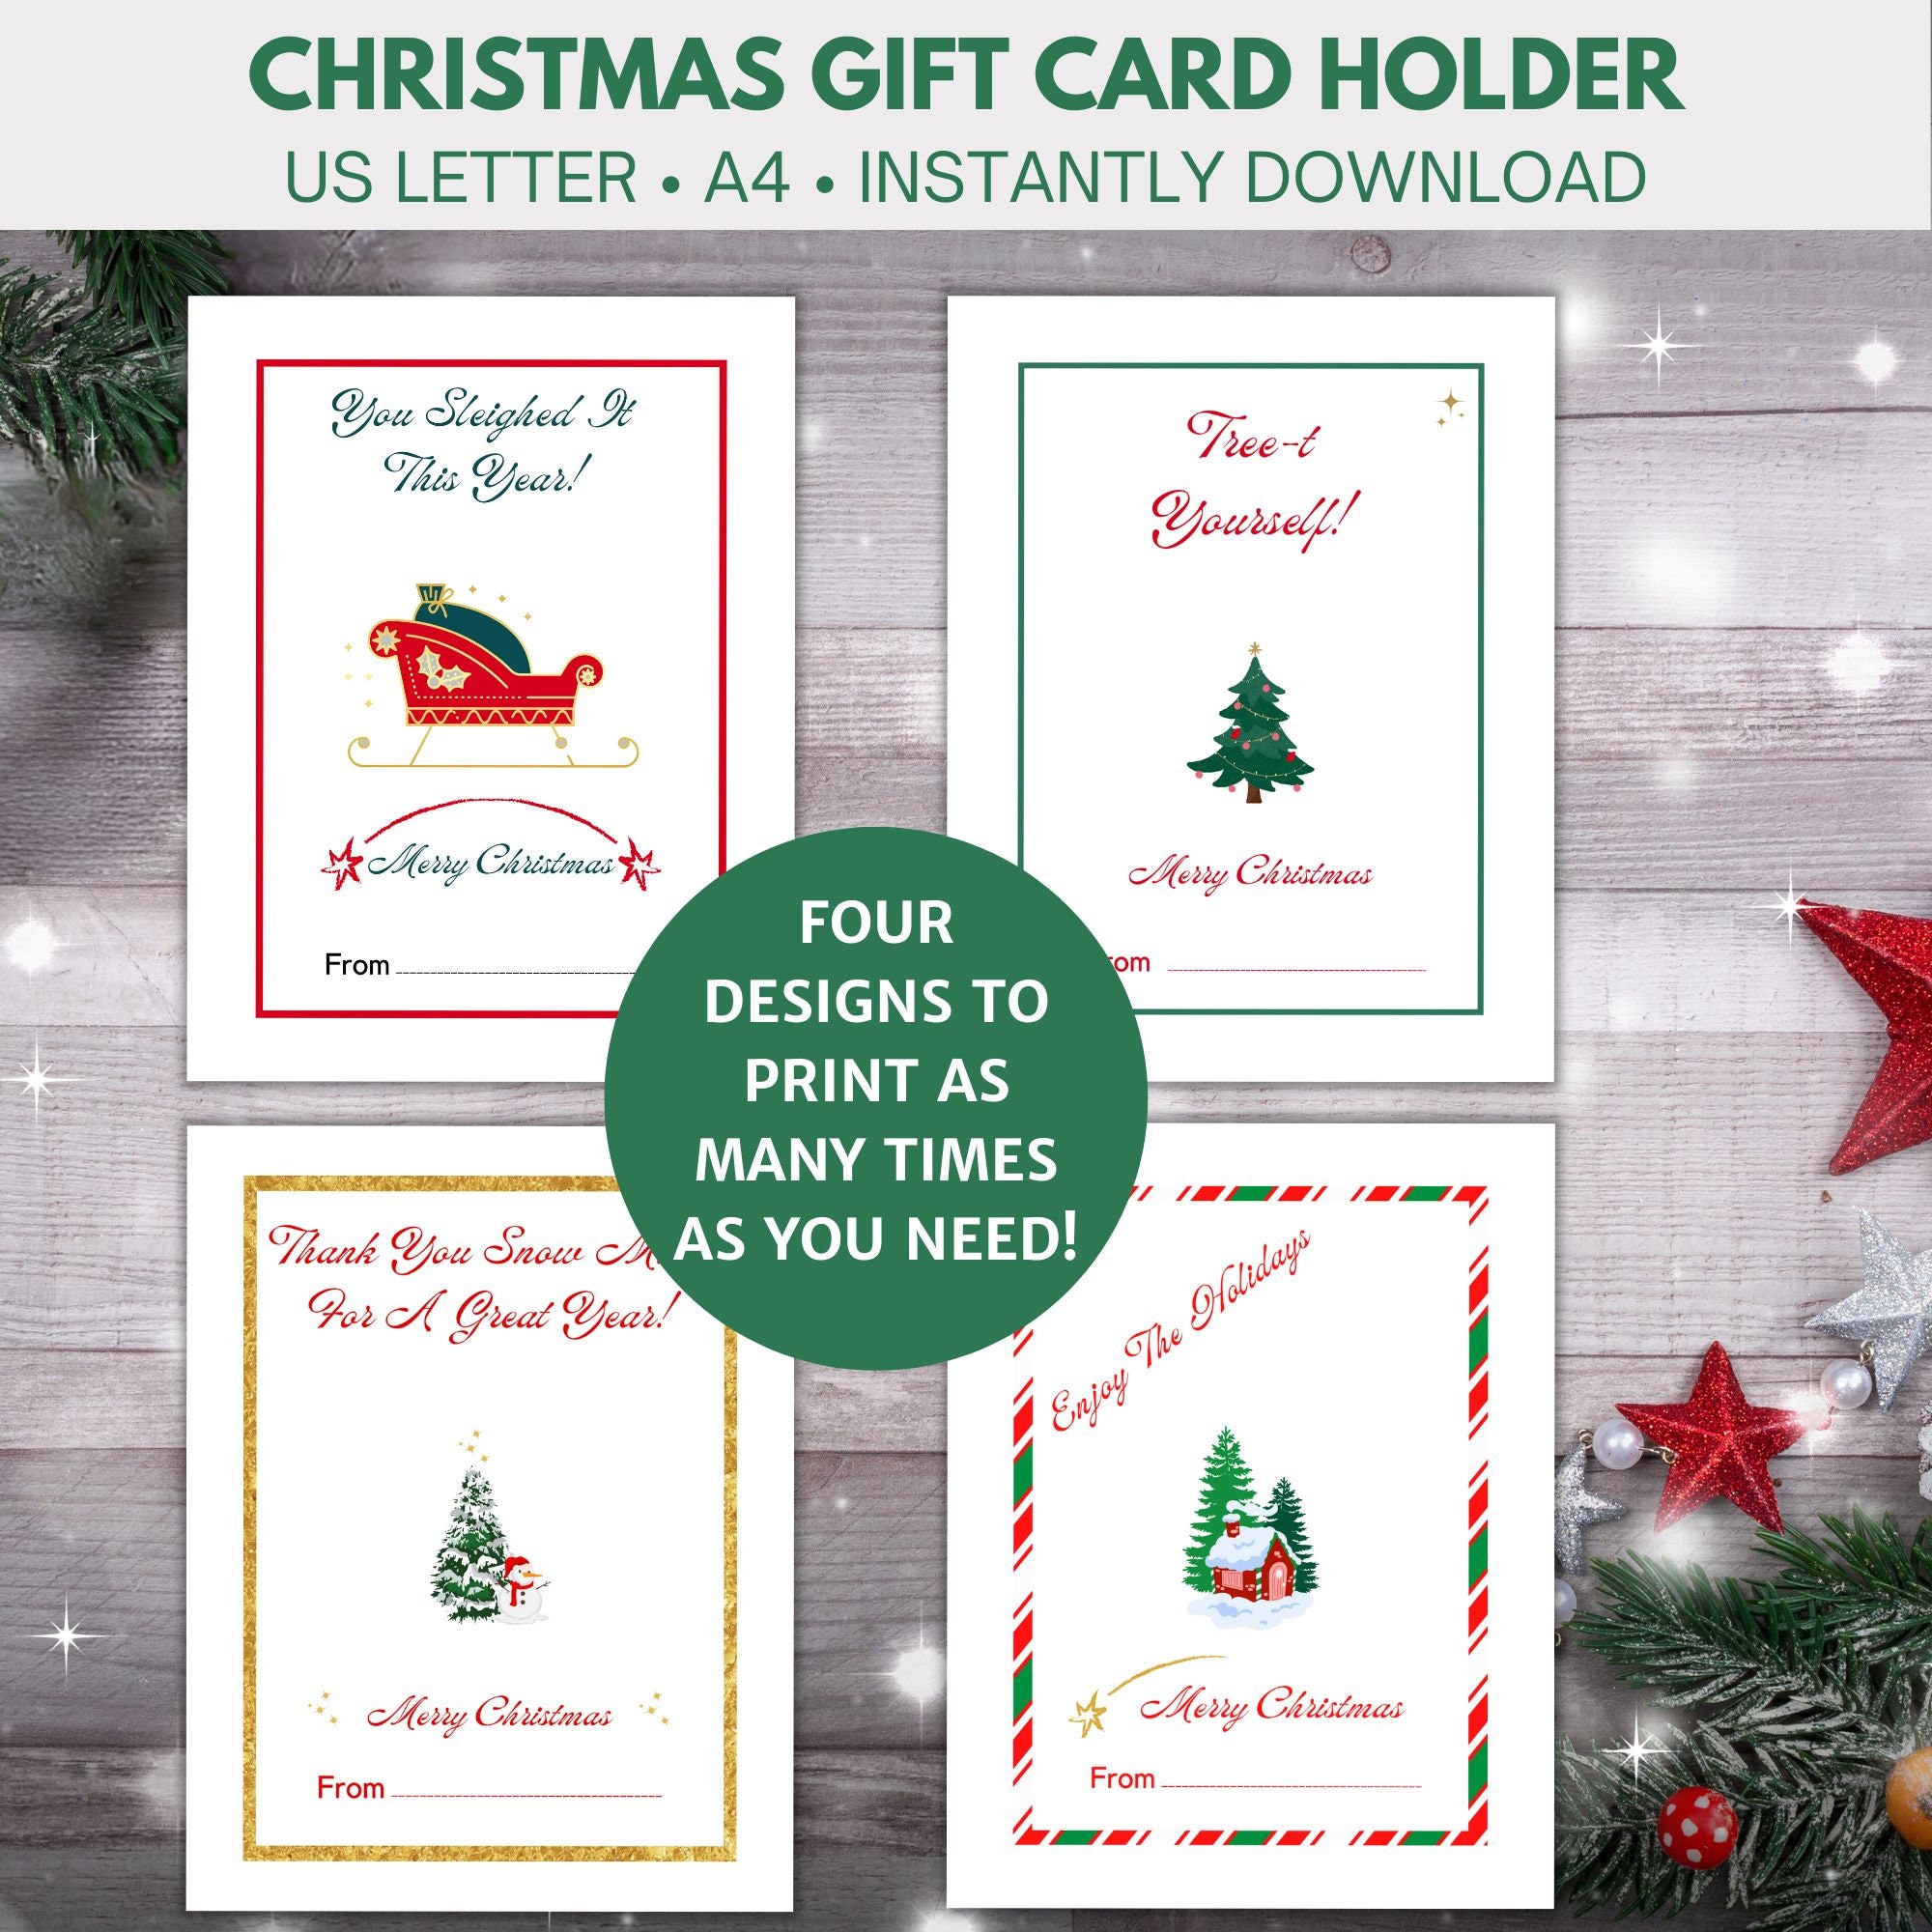 Set of 2 Christmas Gift Card Holders, Holiday Gift Card Holder